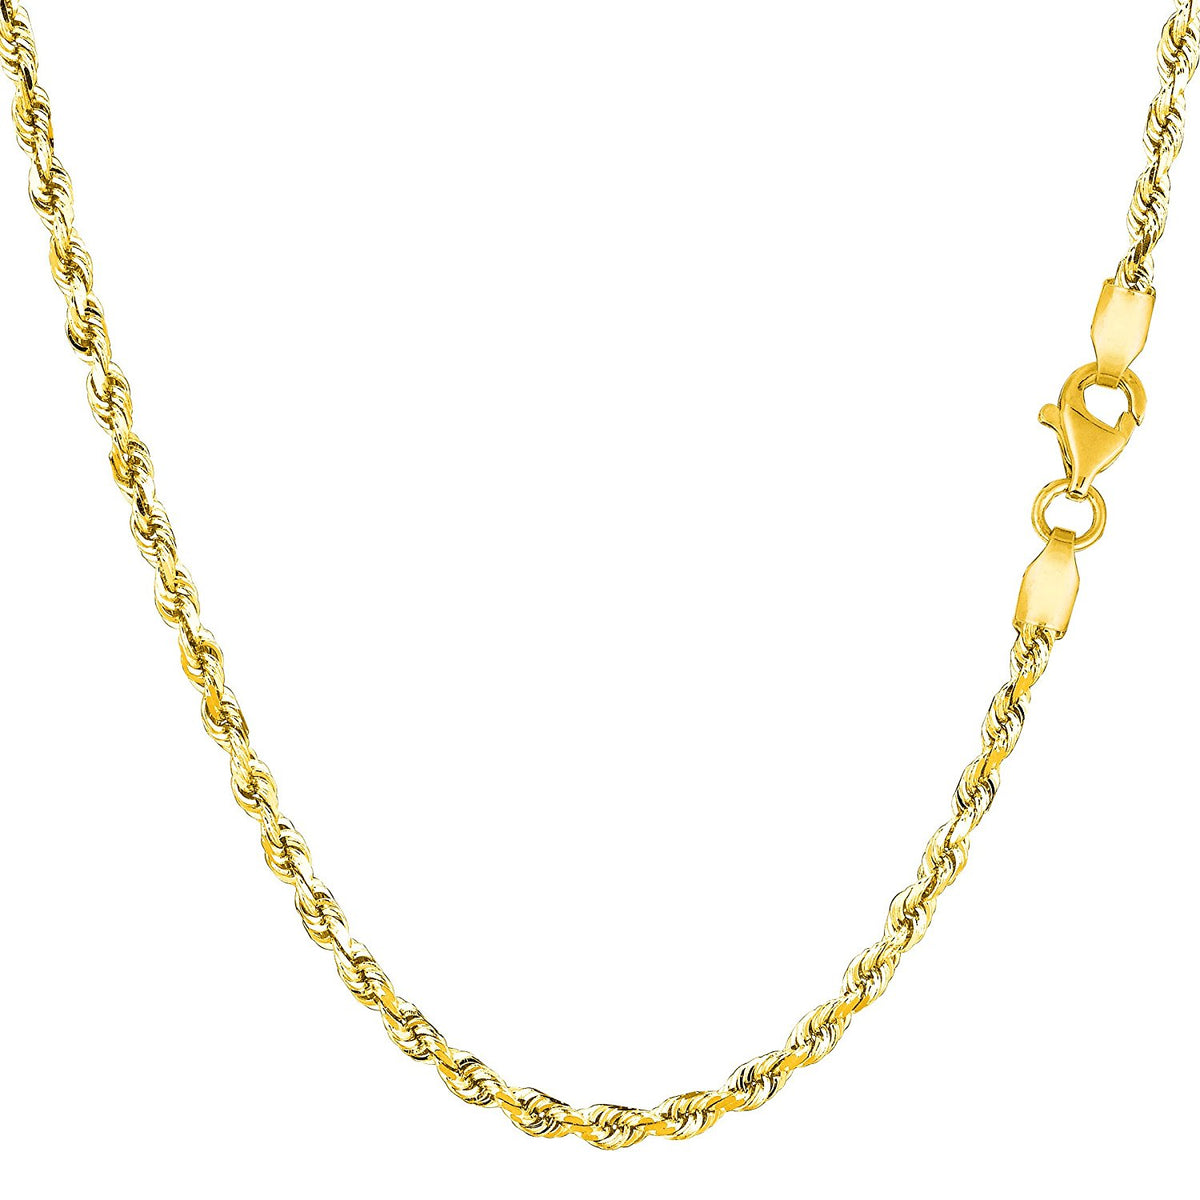 10K Yellow Gold Hollow Rope Chain Necklace, 1.6mm, 24" fine designer jewelry for men and women